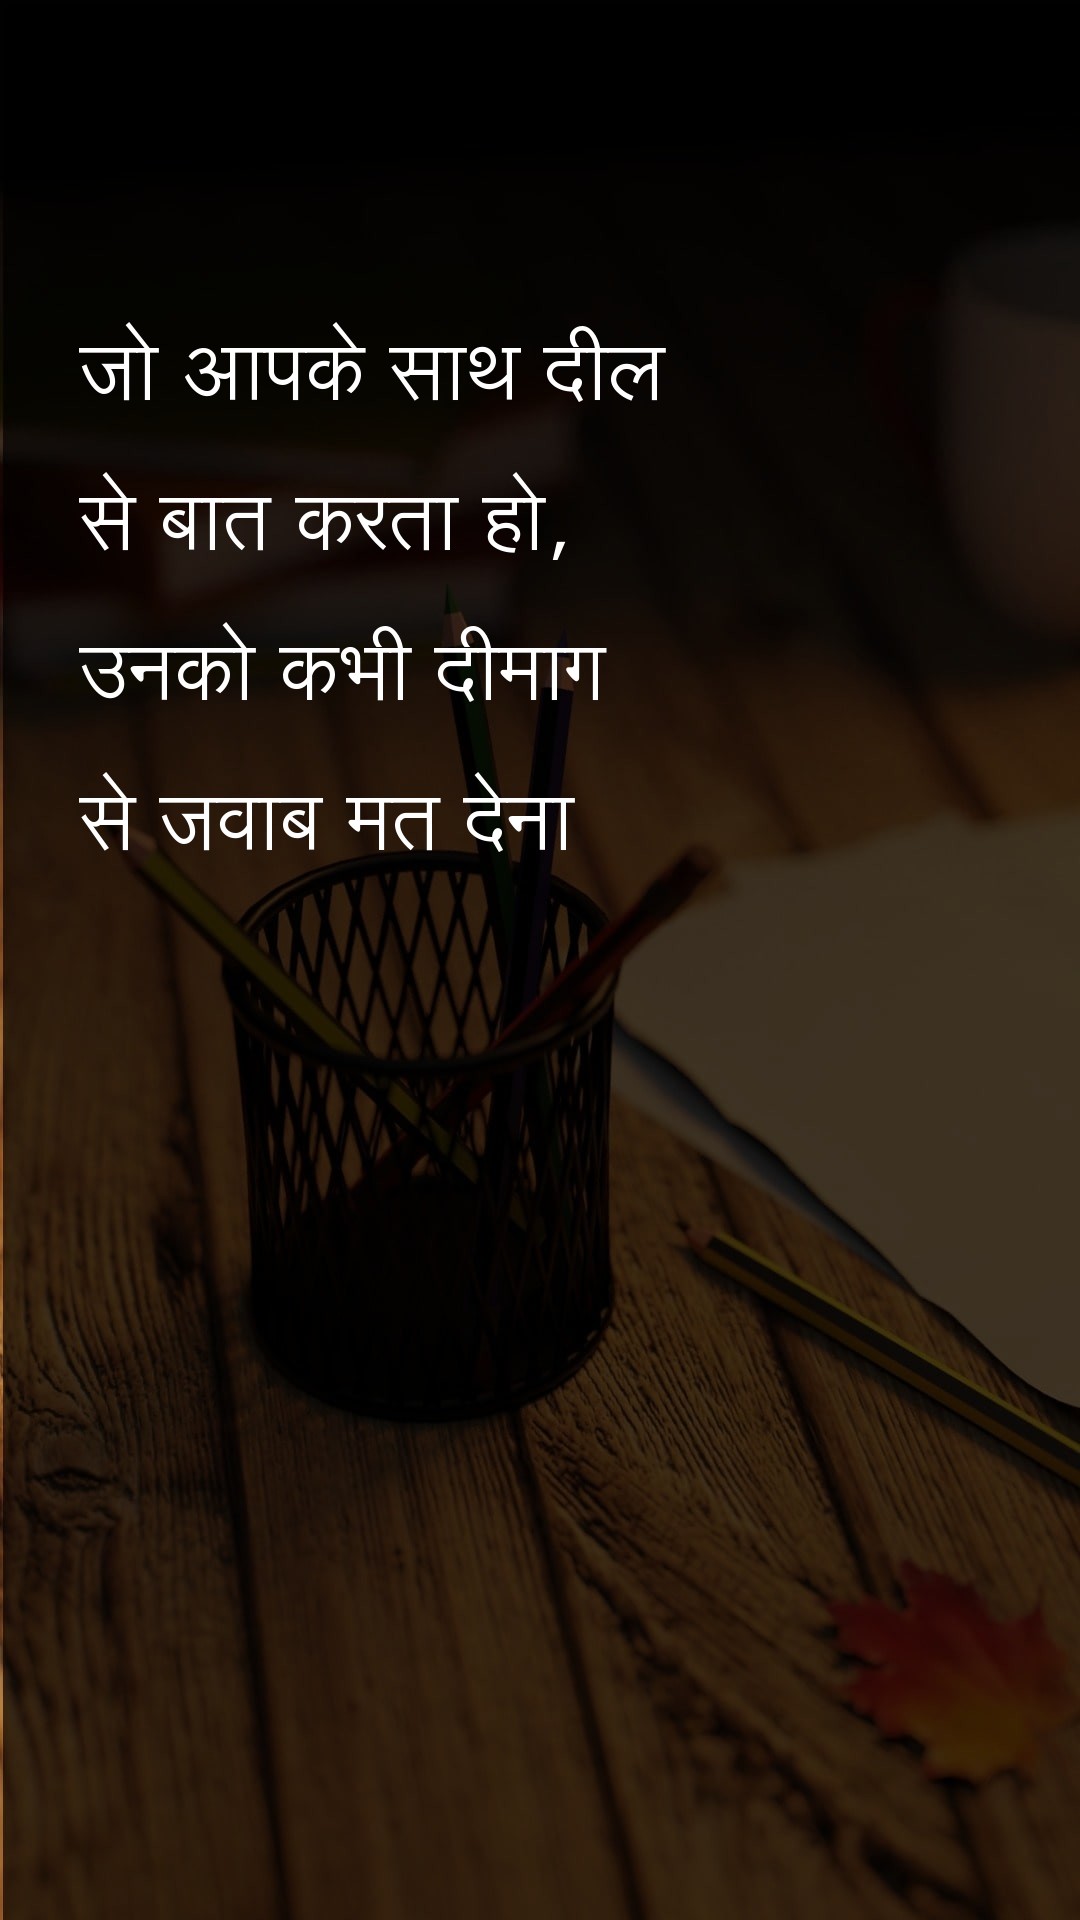 Never mind those who speak with you heartily Hindi Quotes at statush.com